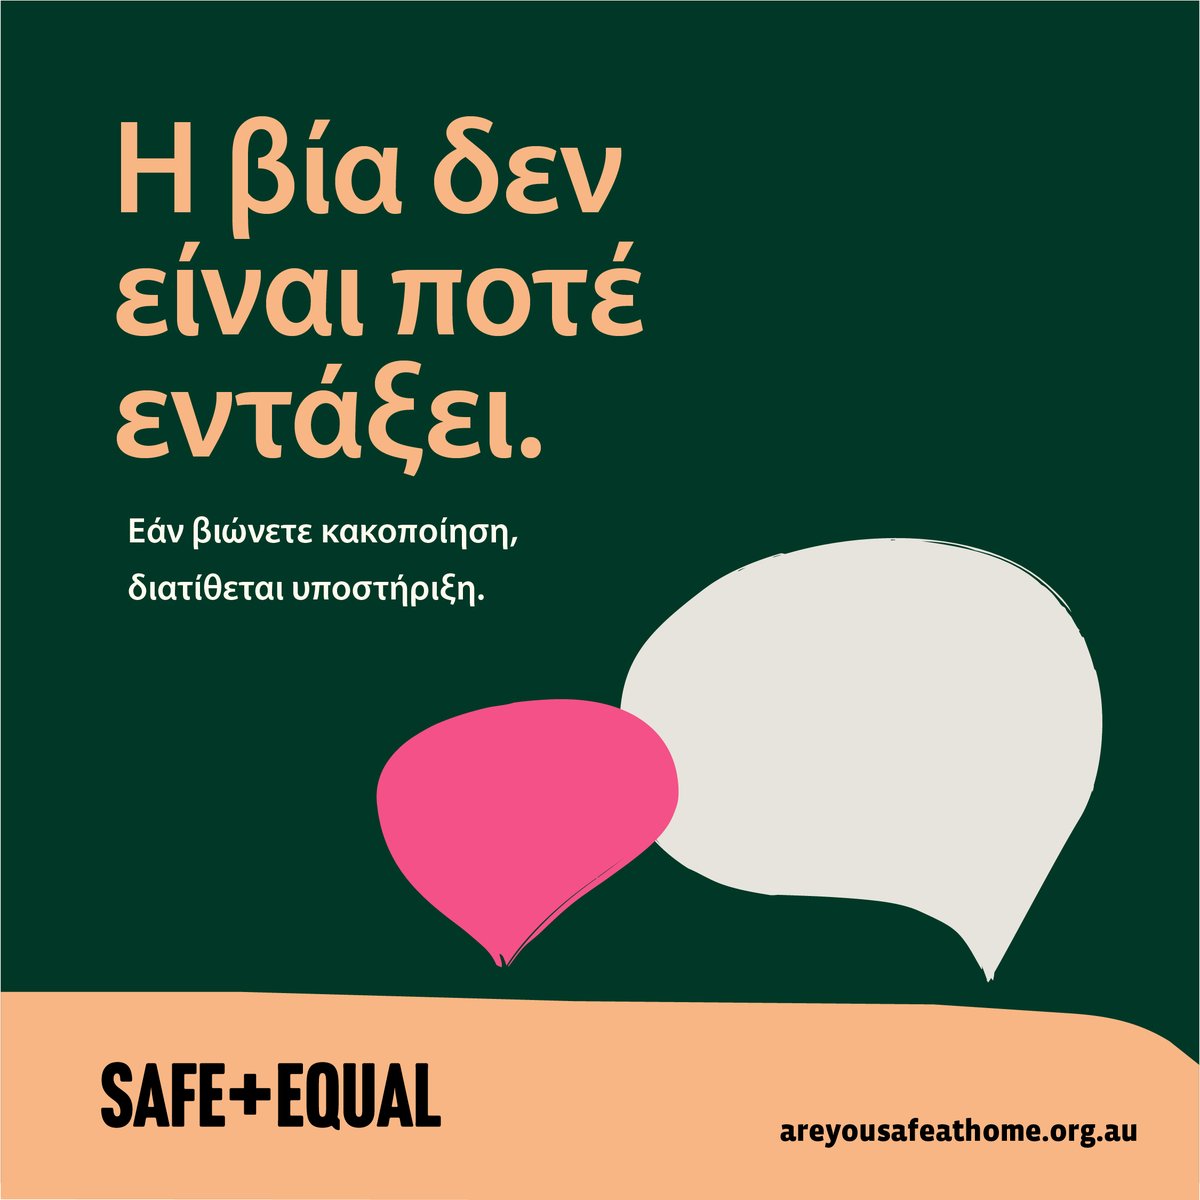 10 May is an opportunity to ask a colleague or loved one ‘are you safe at home?’ — start a conversation to end family violence. #safeandequal #areyousafeathome #proniamlebourne #familyviolencepreventionmonth #support #awareness #community